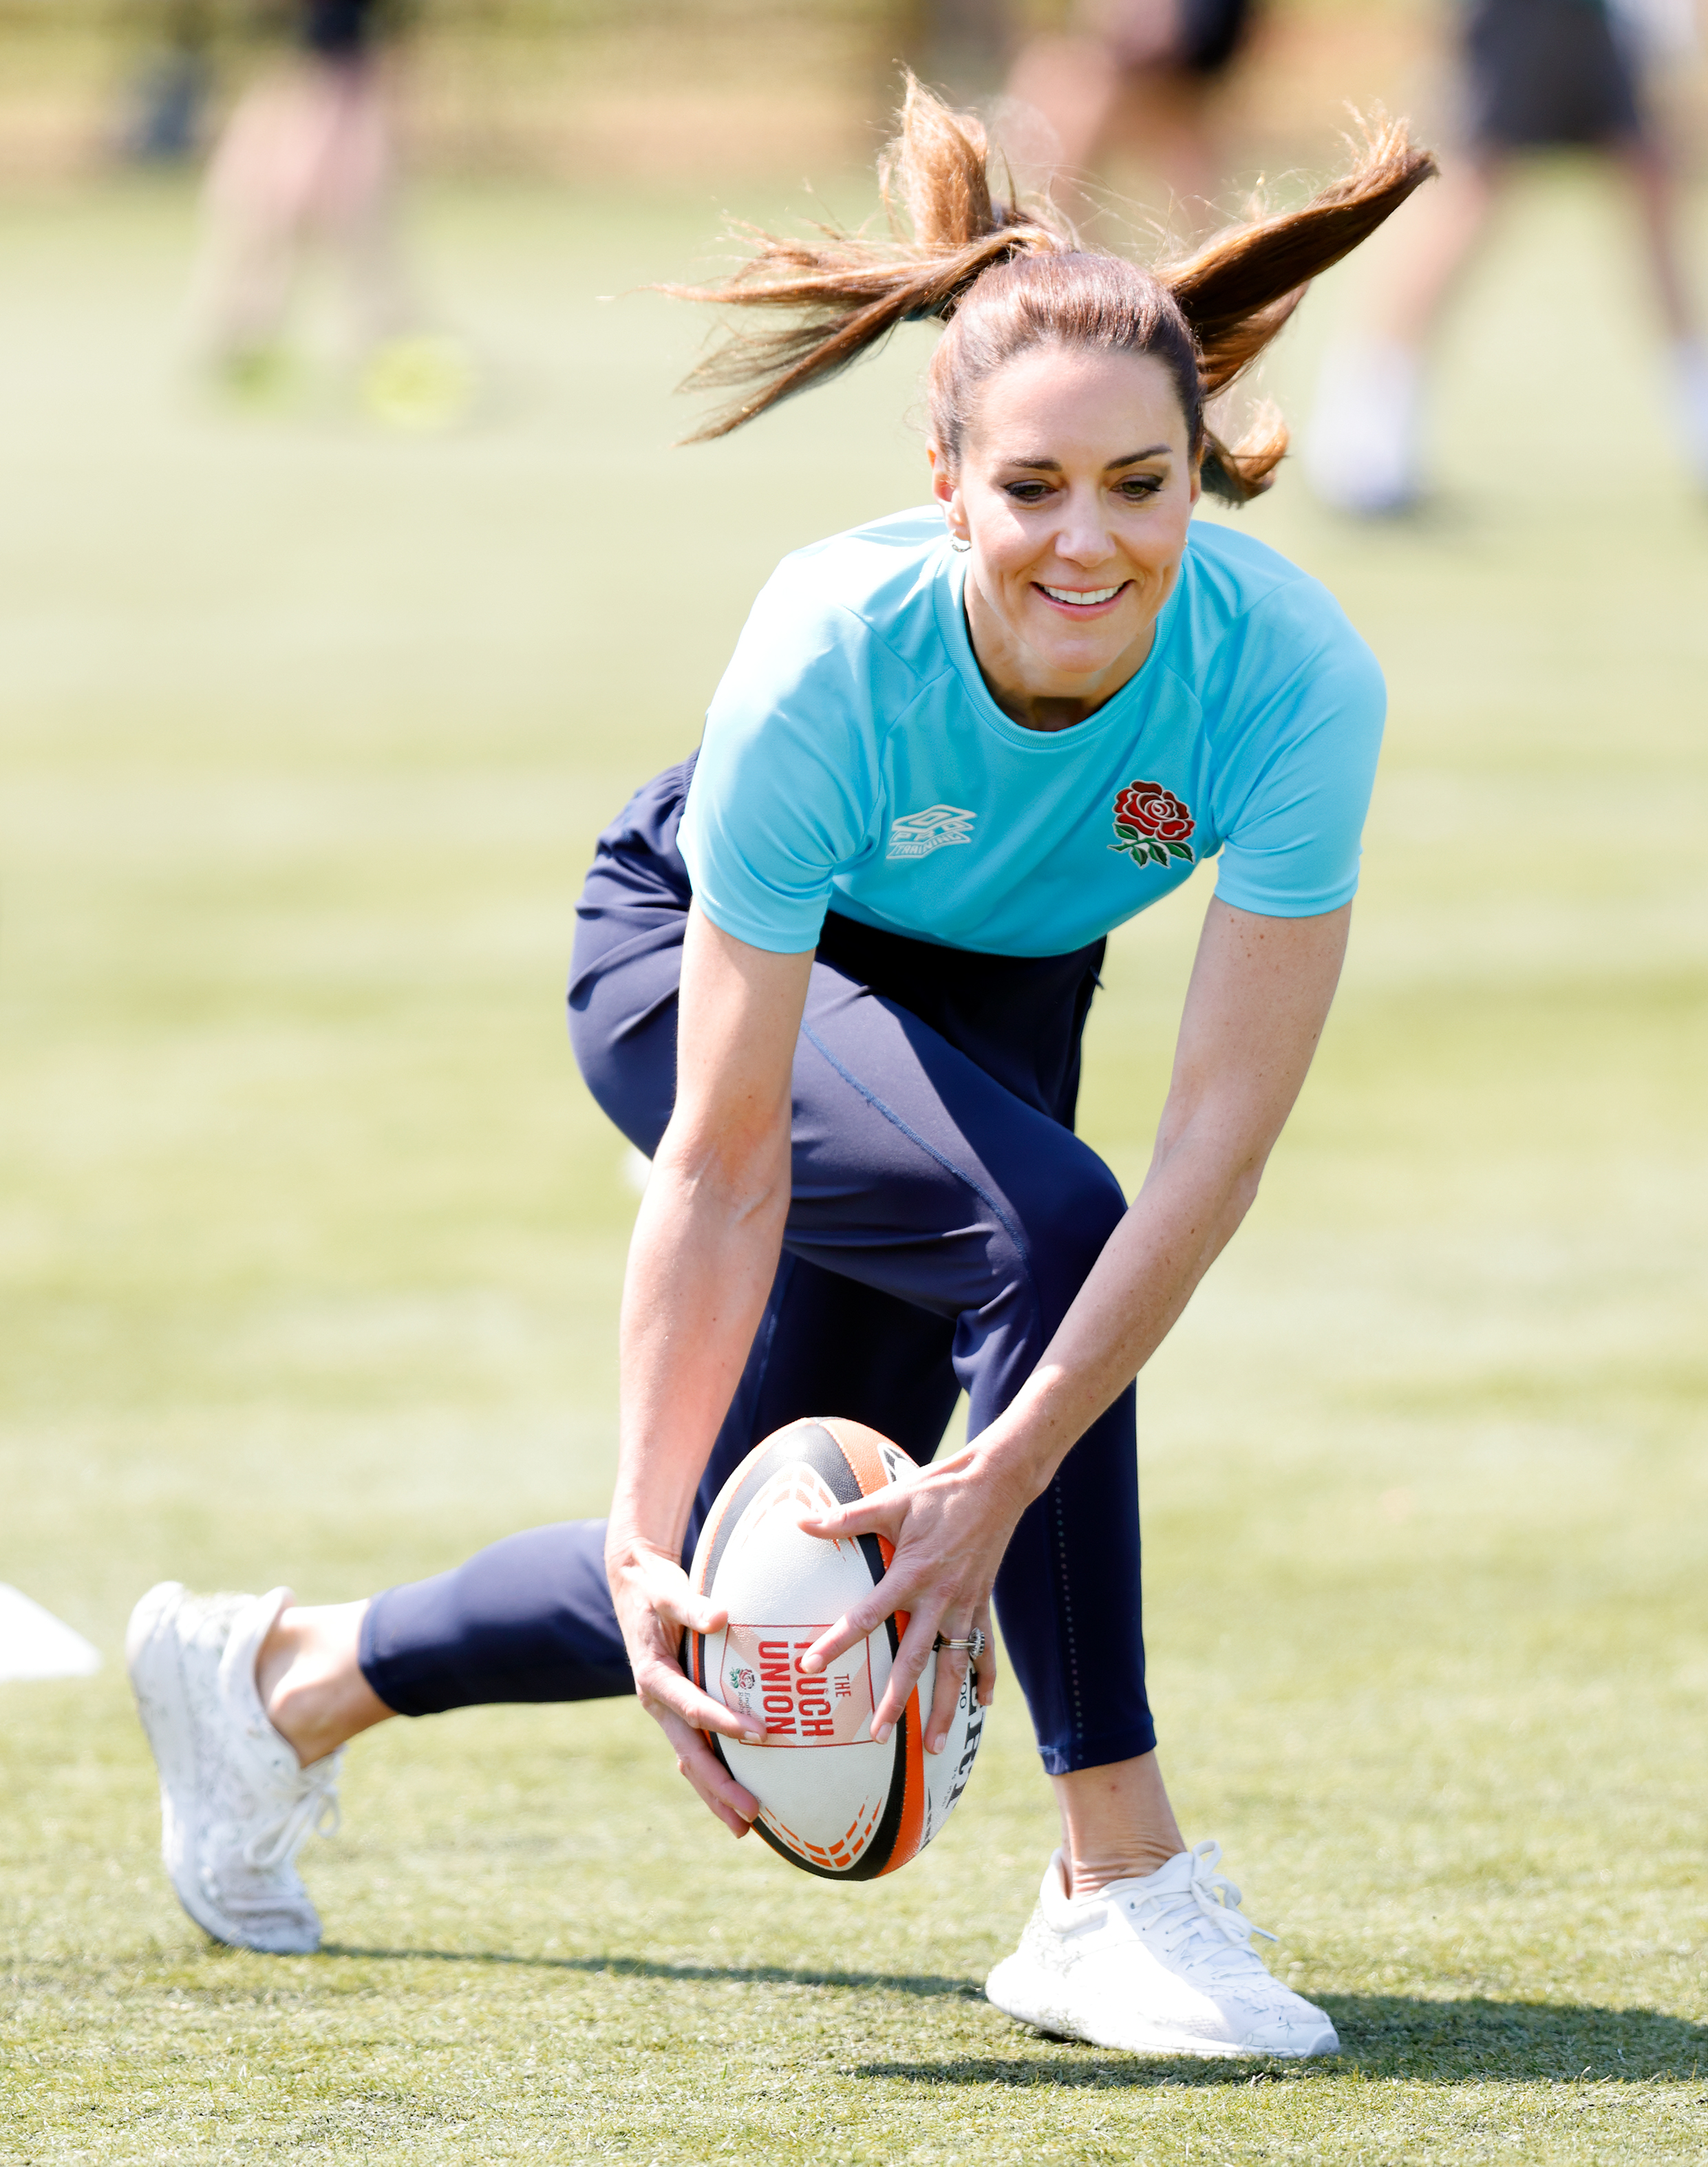 Princess Catherine playing rugby during her visit to the Maidenhead Rugby Club in Maidenhead, England on June 7, 2023 | Source: Getty Images